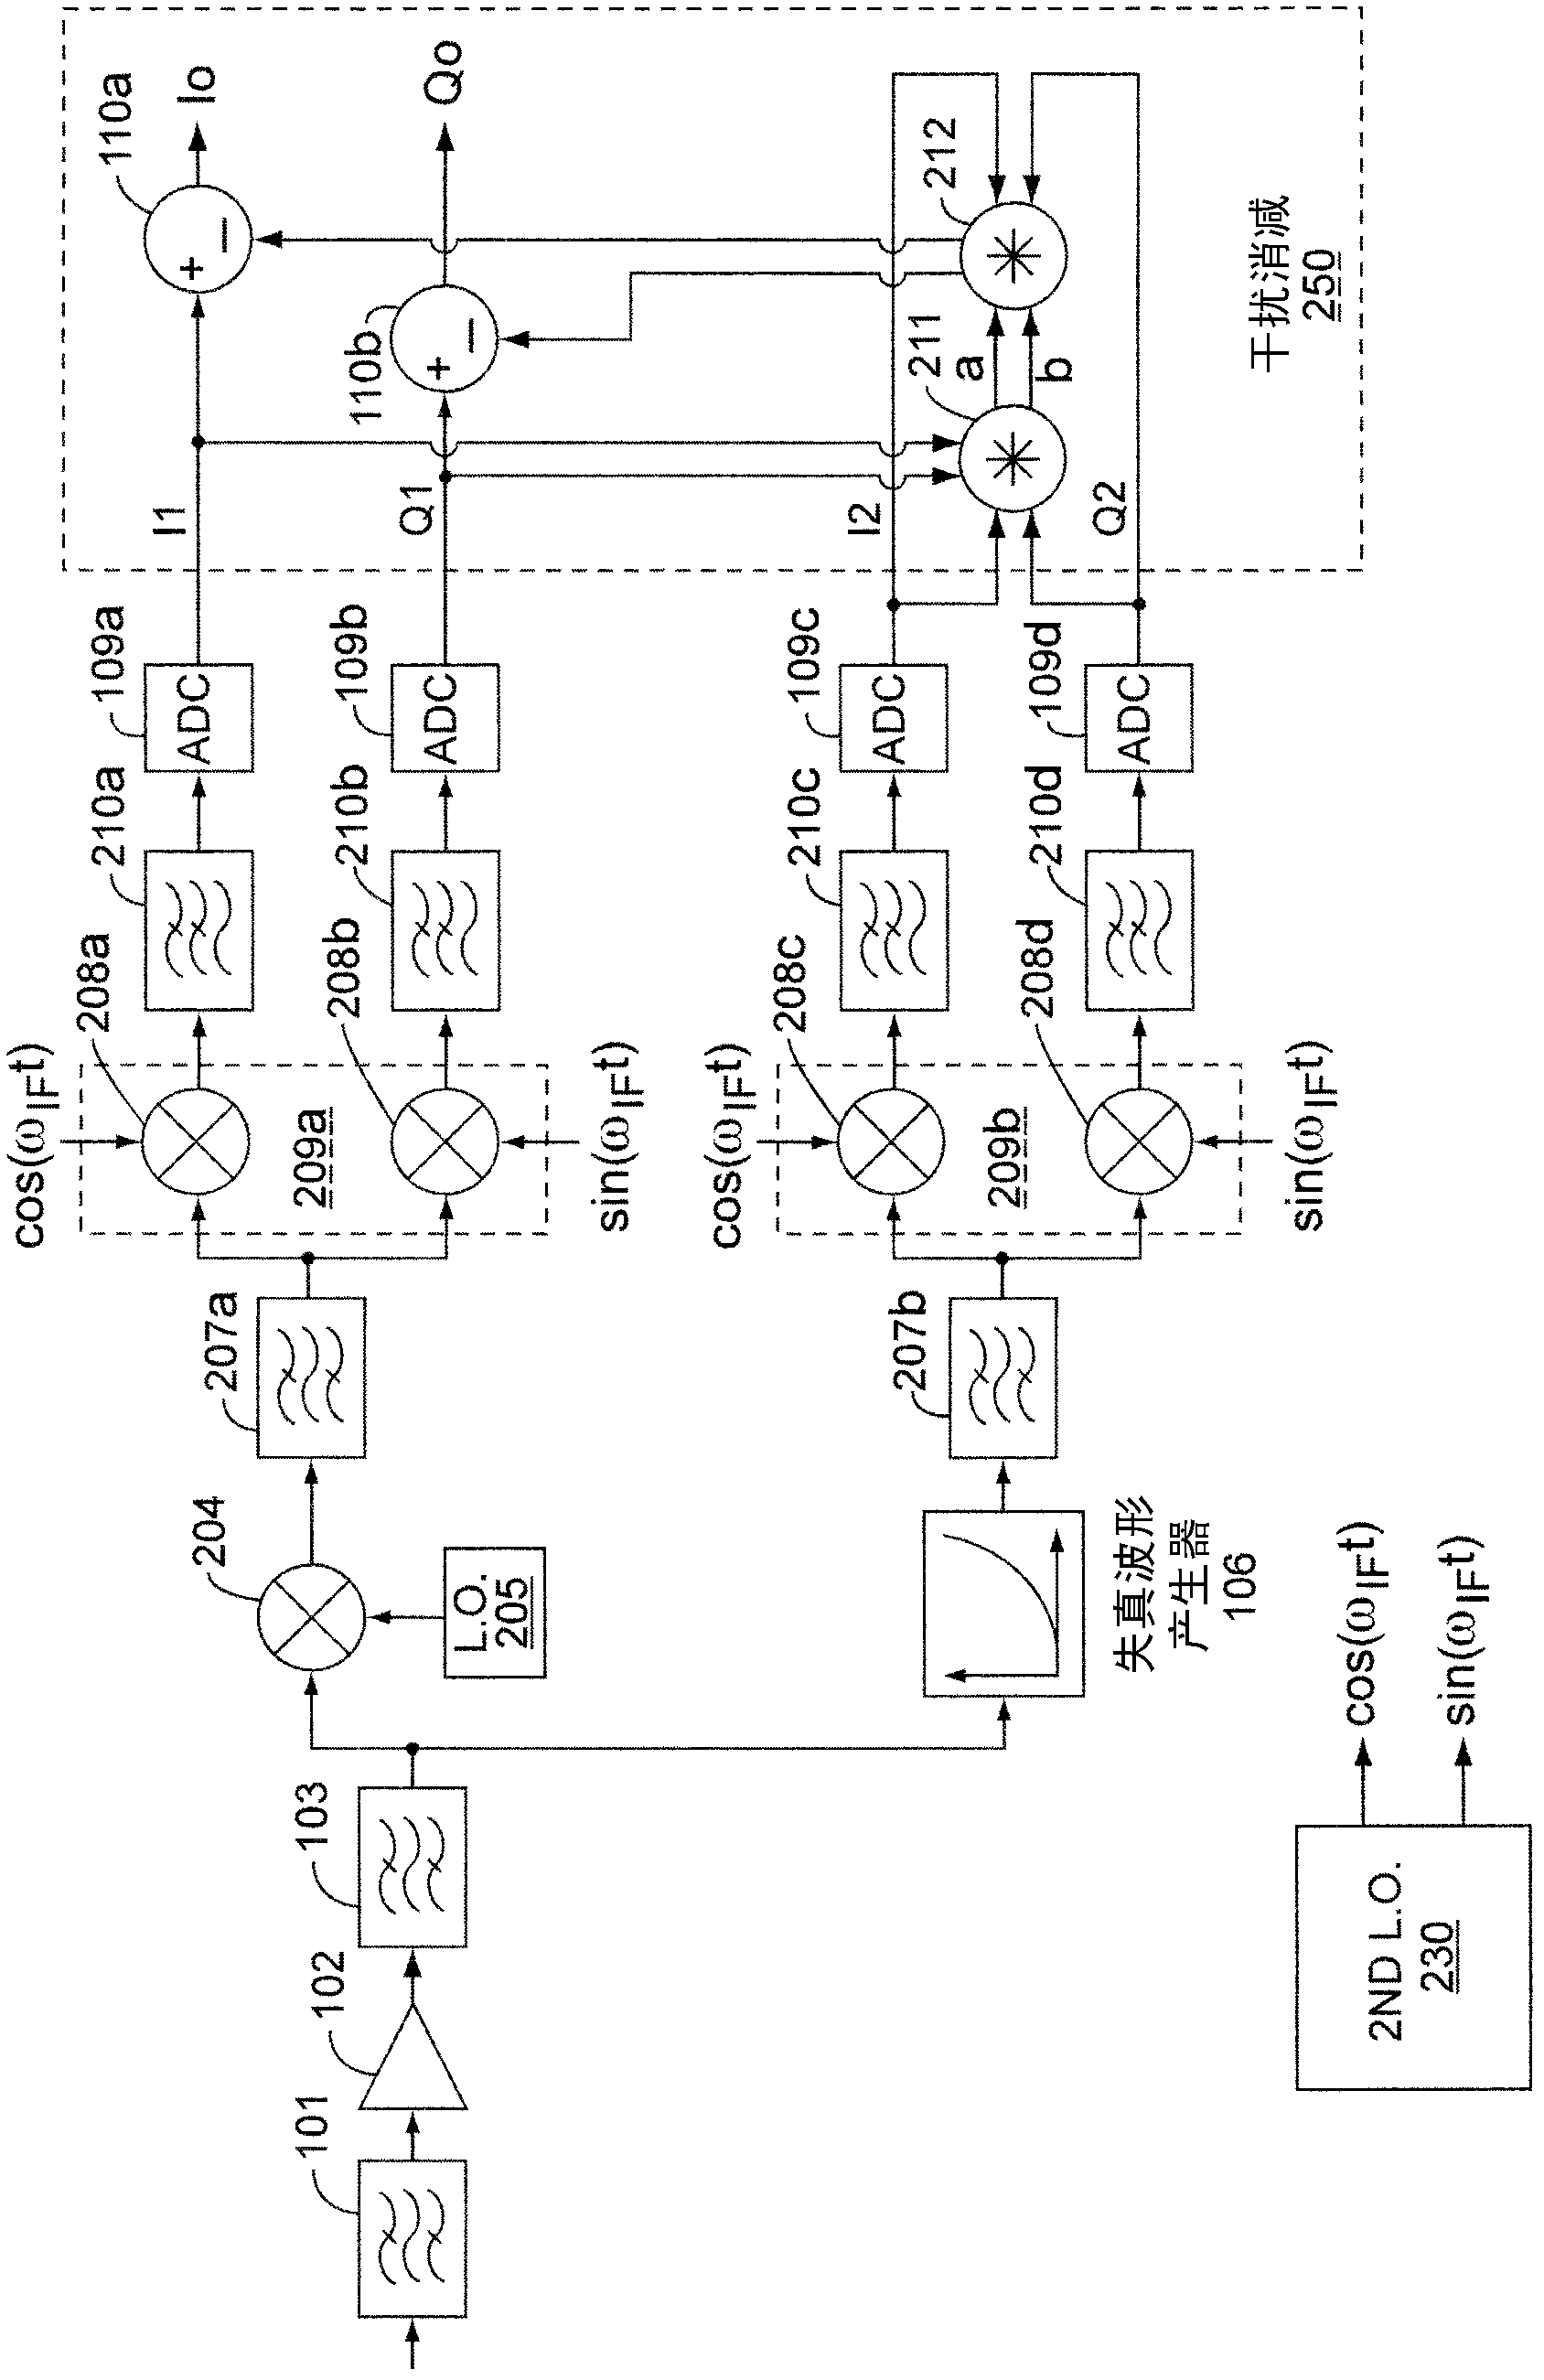 Interference cancellation in an OFDM receiver